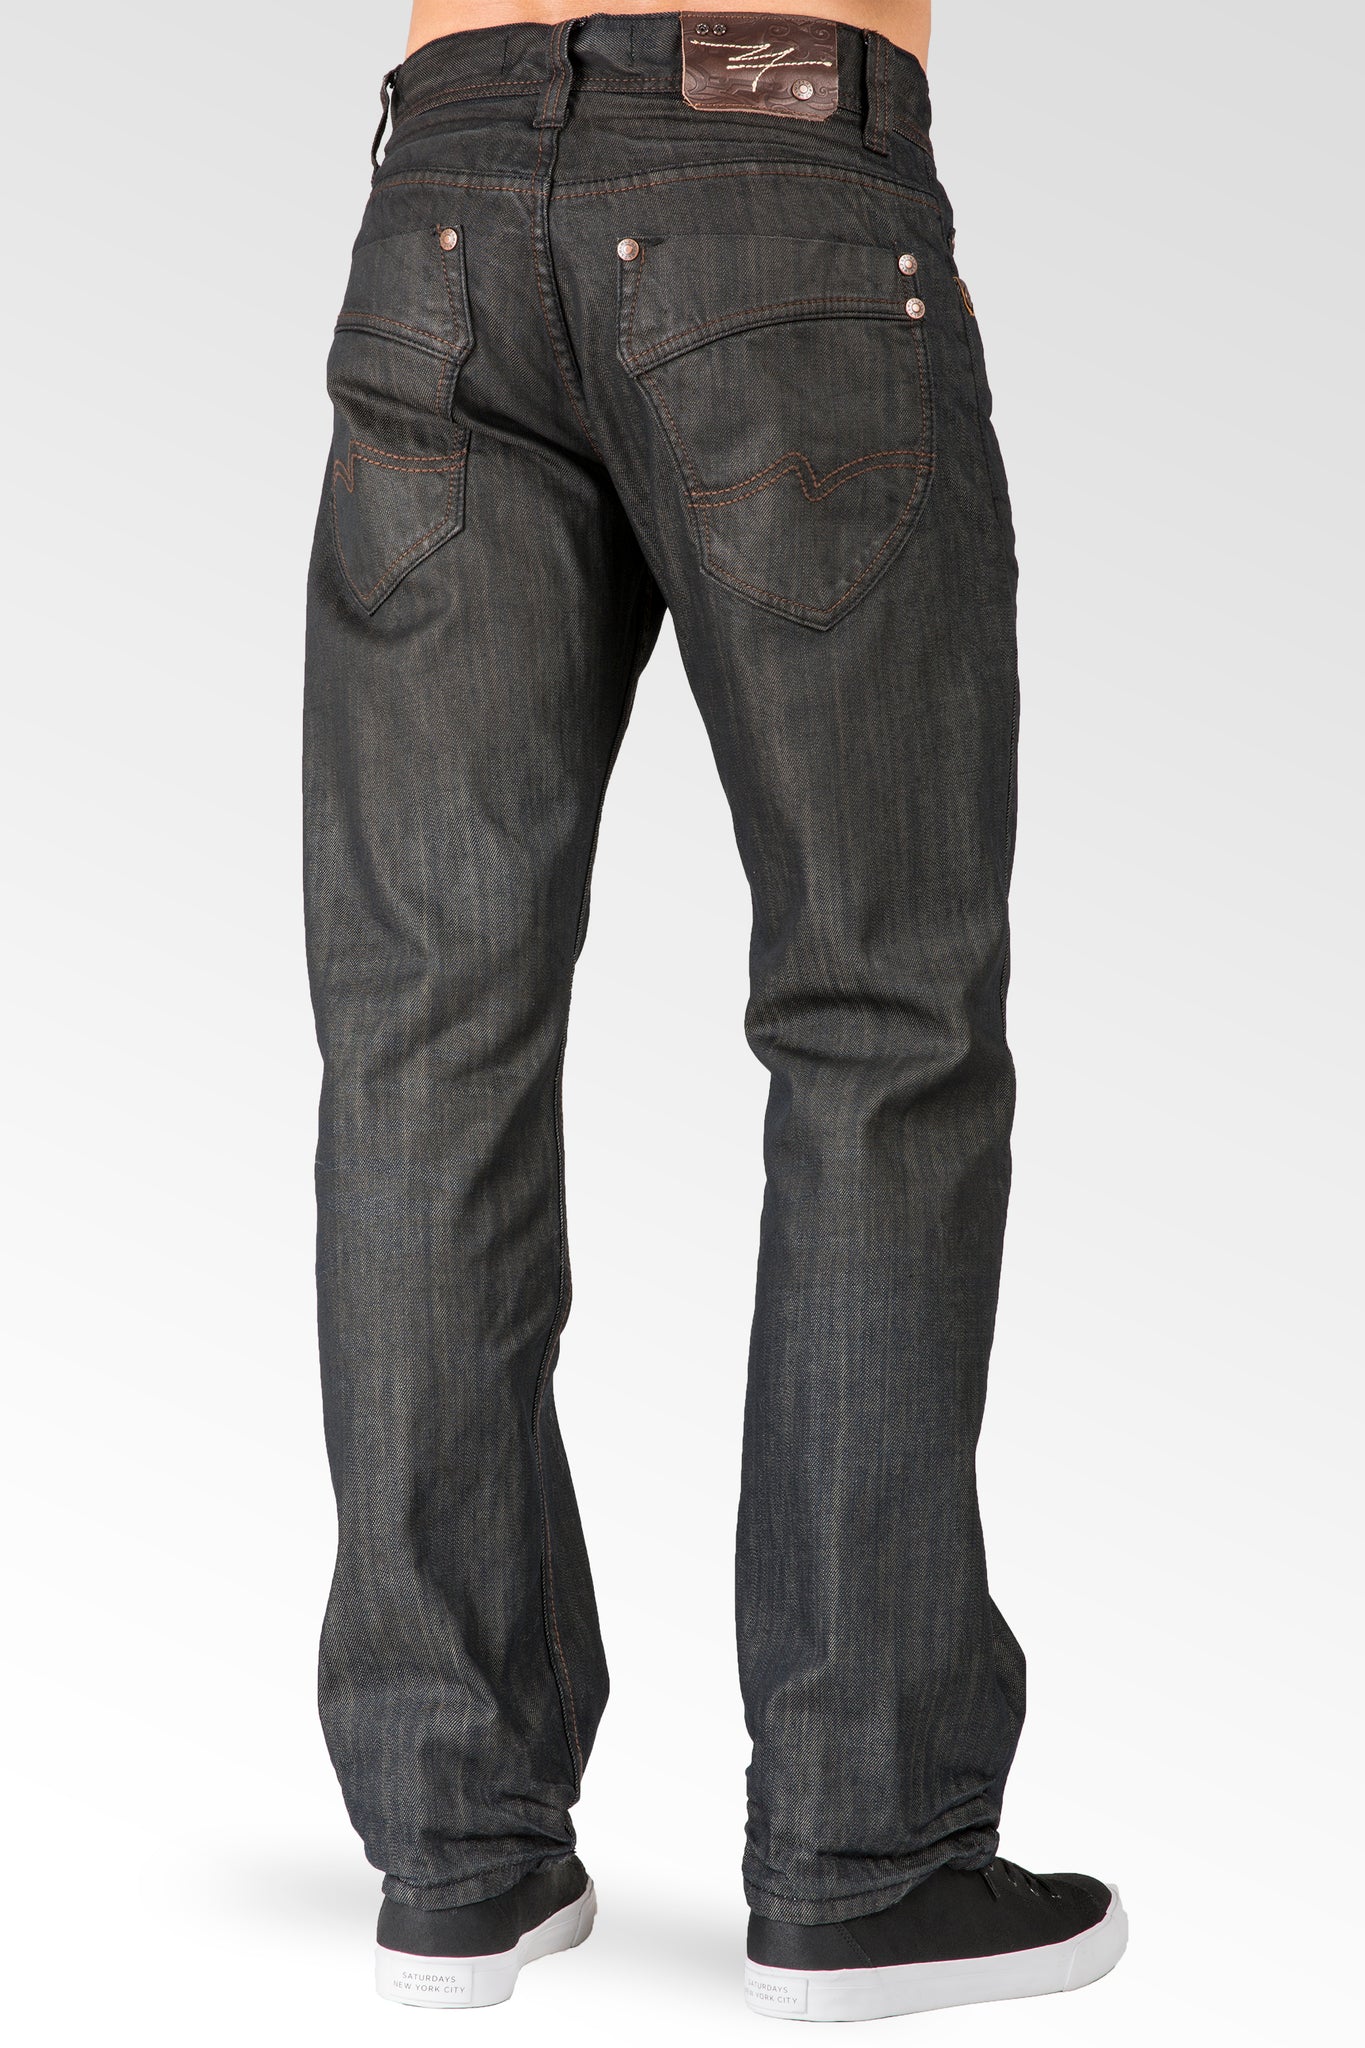 Level 7 Men's Relaxed Straight Wrinkle Dirty Tint 5 pocket Jeans ...